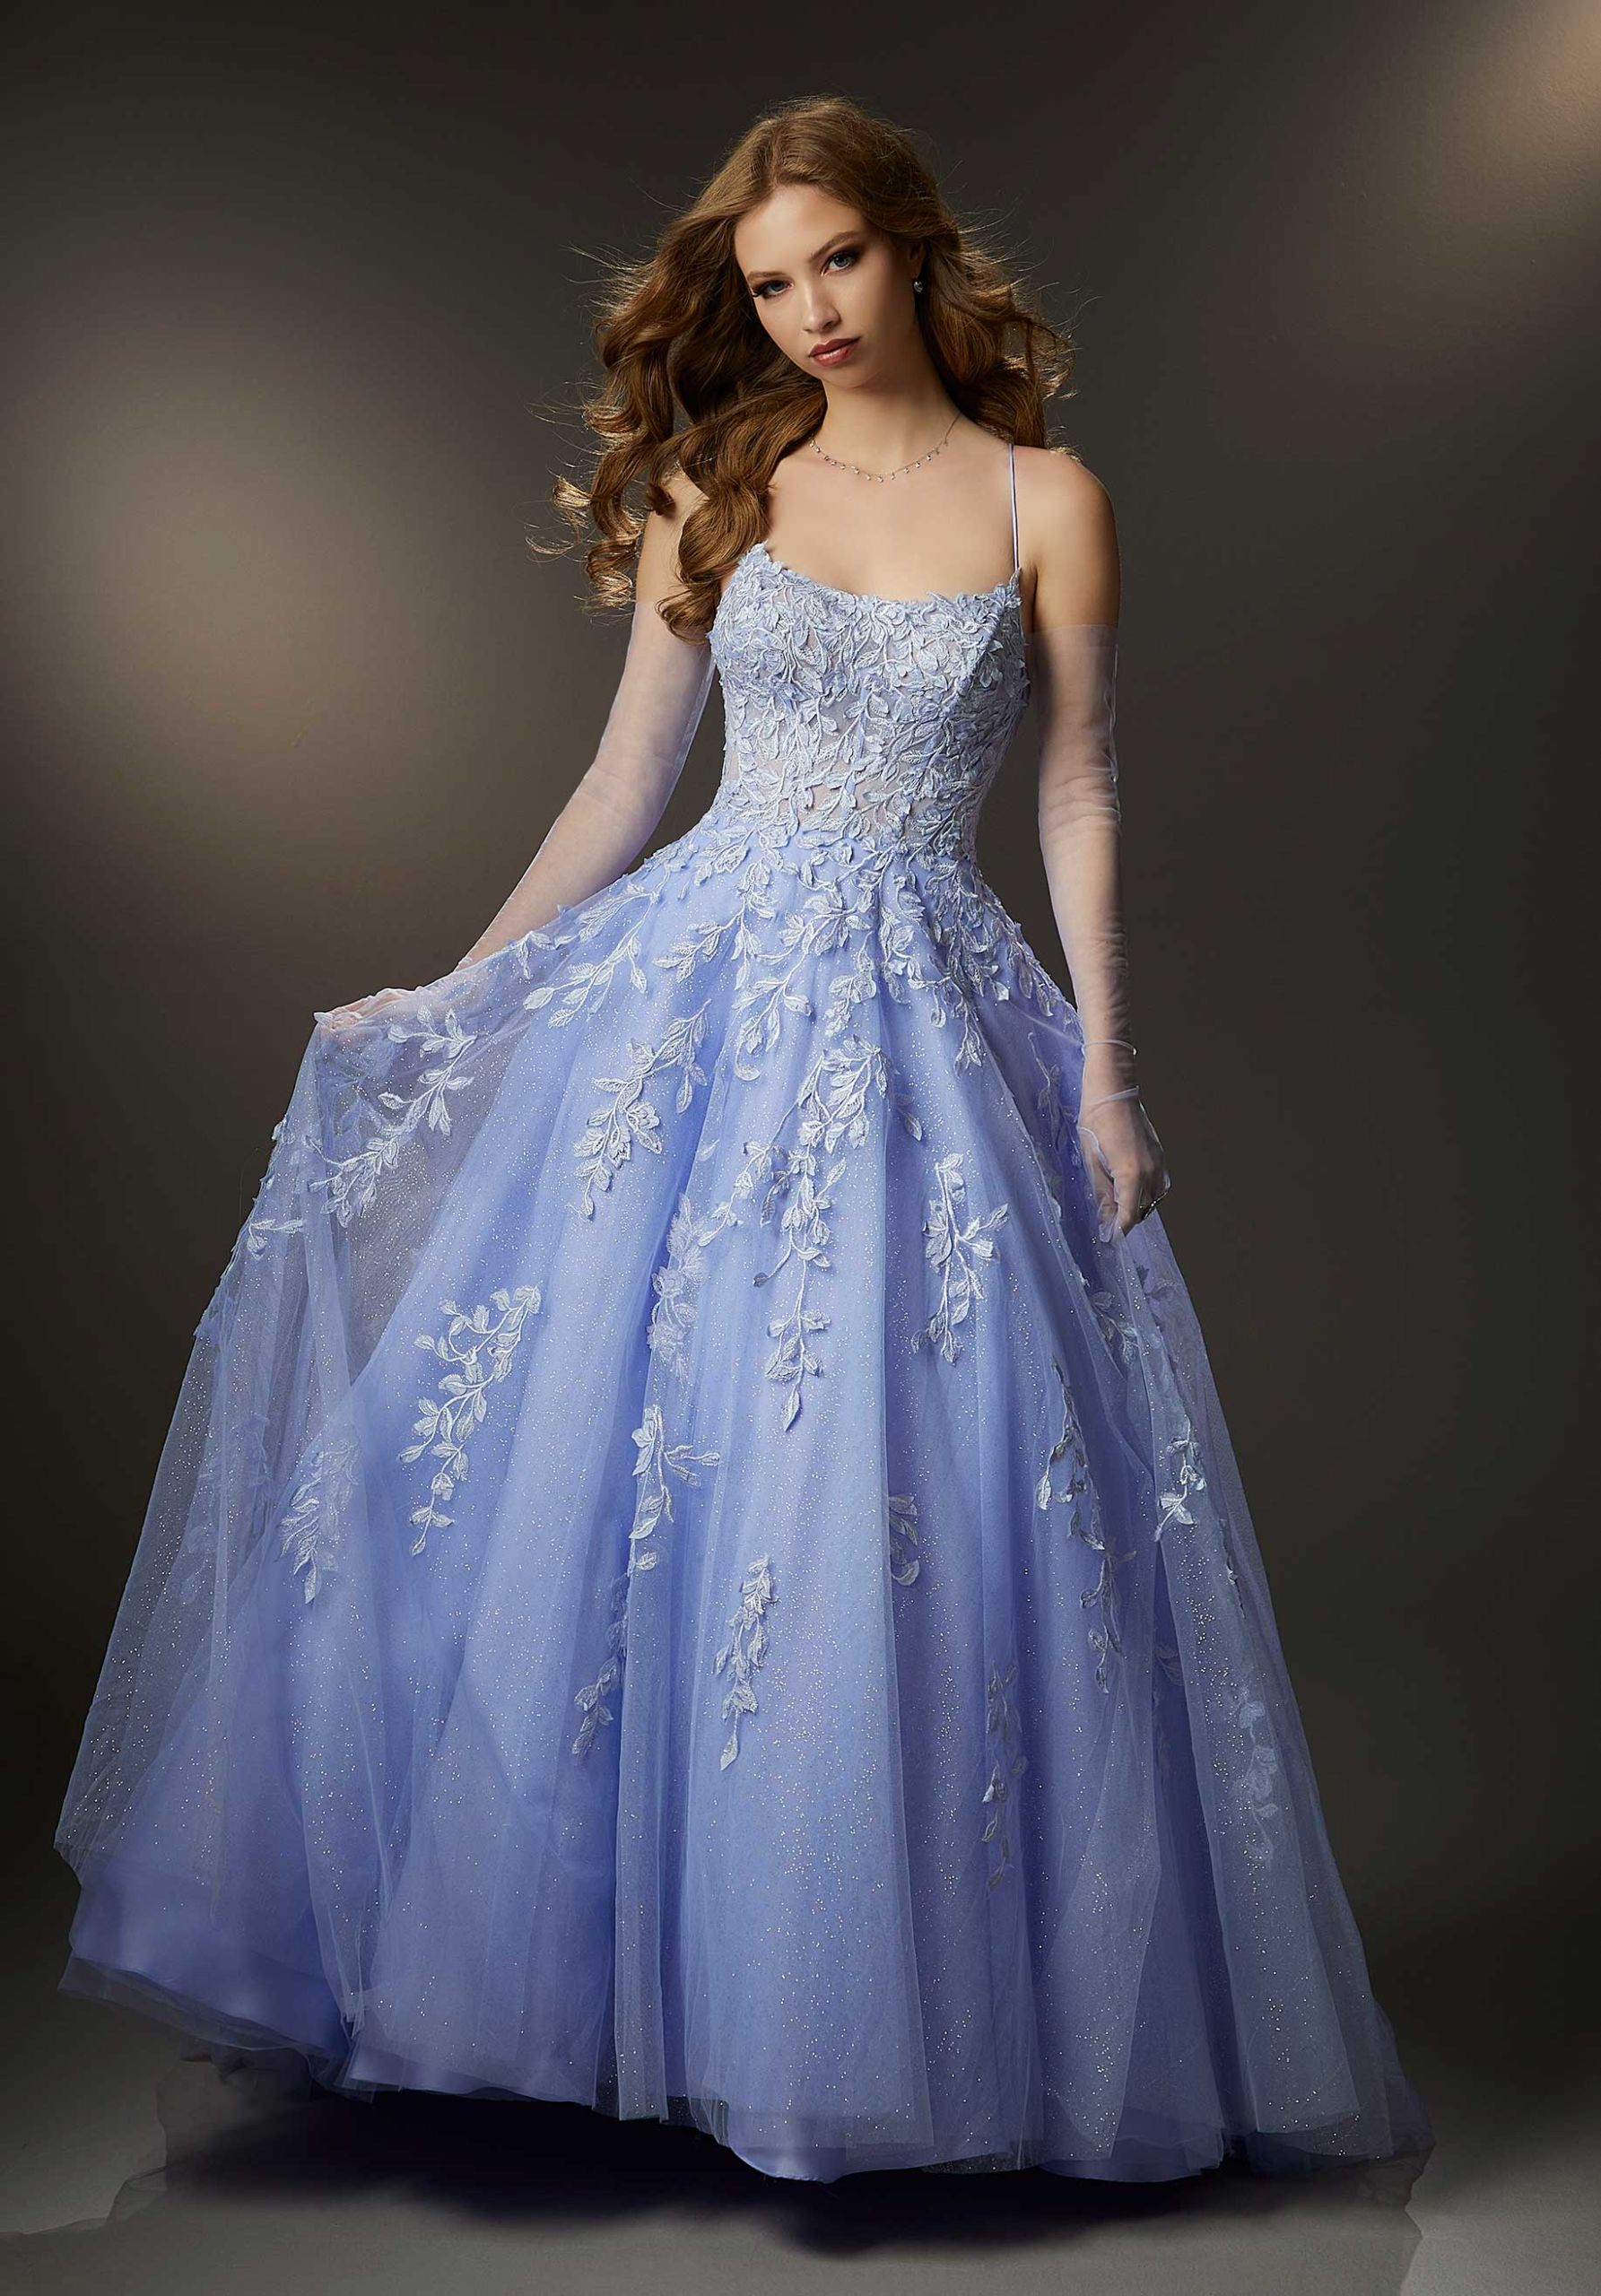 PROM | Bridal Boutique Wisconsin | Over 35 Years of Beautiful Dresses